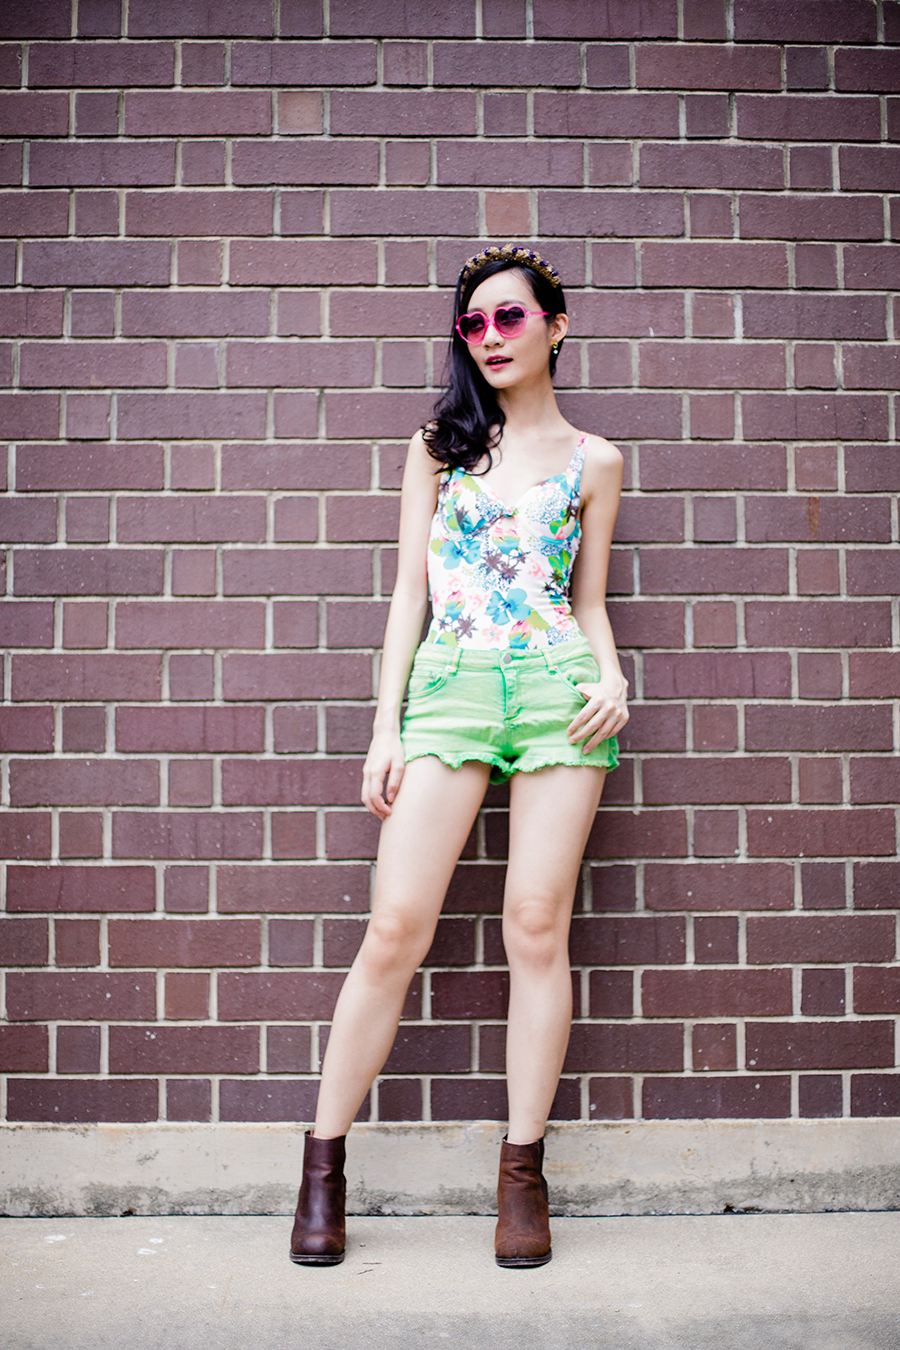 Florals in Green Outfit: Vedette Shapewear Bessie Swimwear Shapewear, Forever 21 lime green denim cutoff shorts, Osewaya mermaid ear studs via JRunway, pink heart-shaped sunglasses, Garlands and Gardens floral headband, Jeffrey Campbell leather heeled boots via Chictopia Shop.